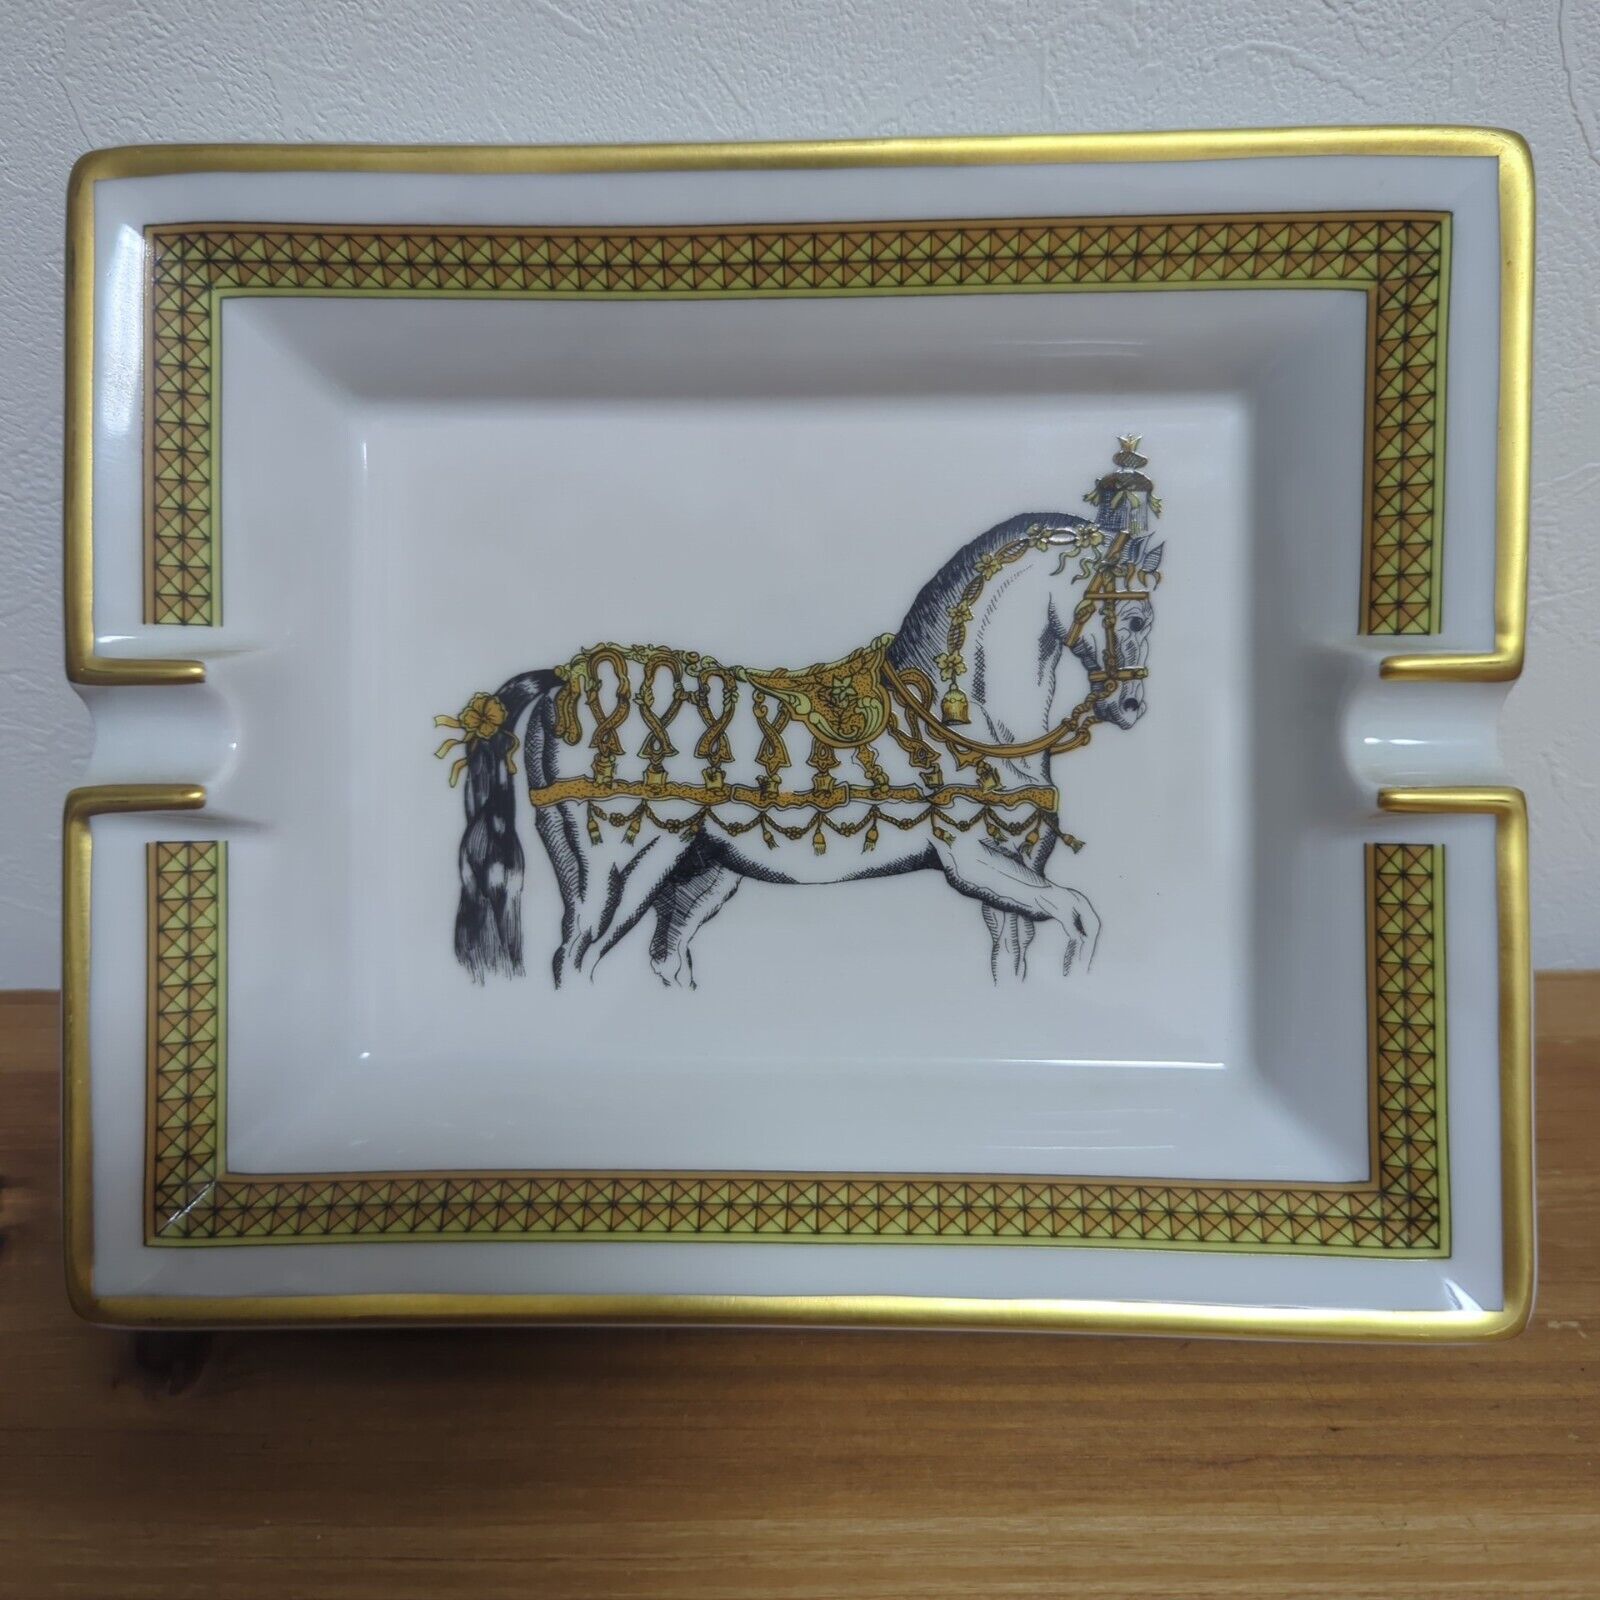 Very good condition HERMES Ashtray Horse 18.5cm x 15cm No Box from japan